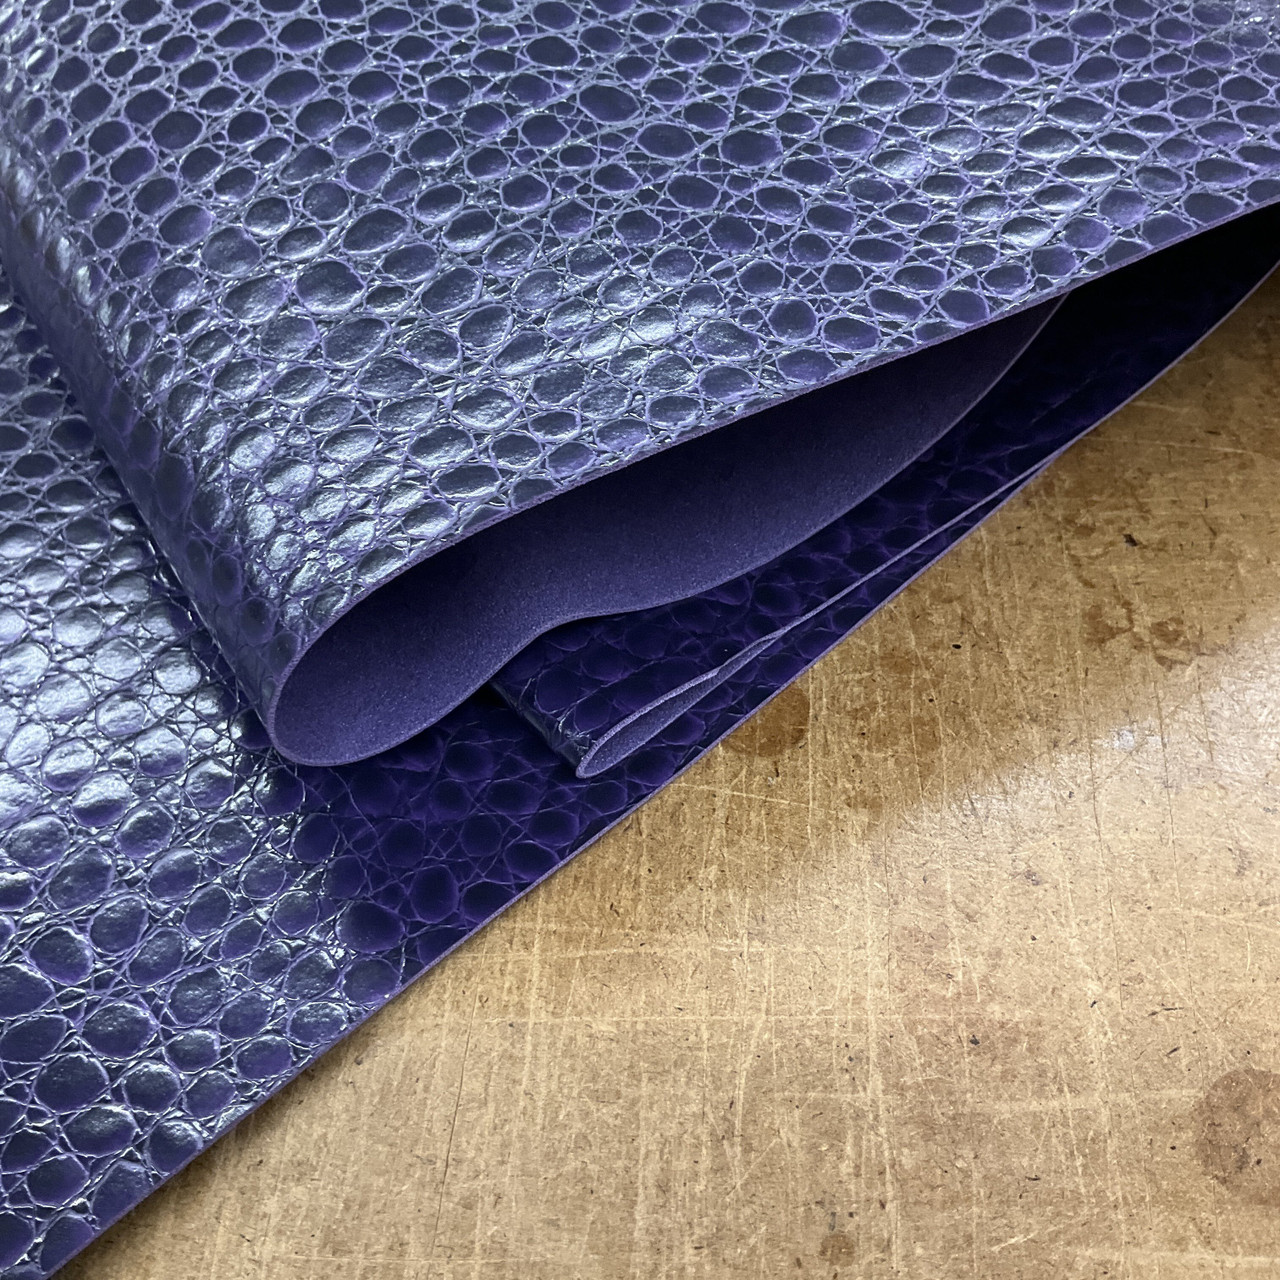 VIOLET - Glossy Faux Snake Skin Upholstery Vinyl Fabric, CROCCO, BTY